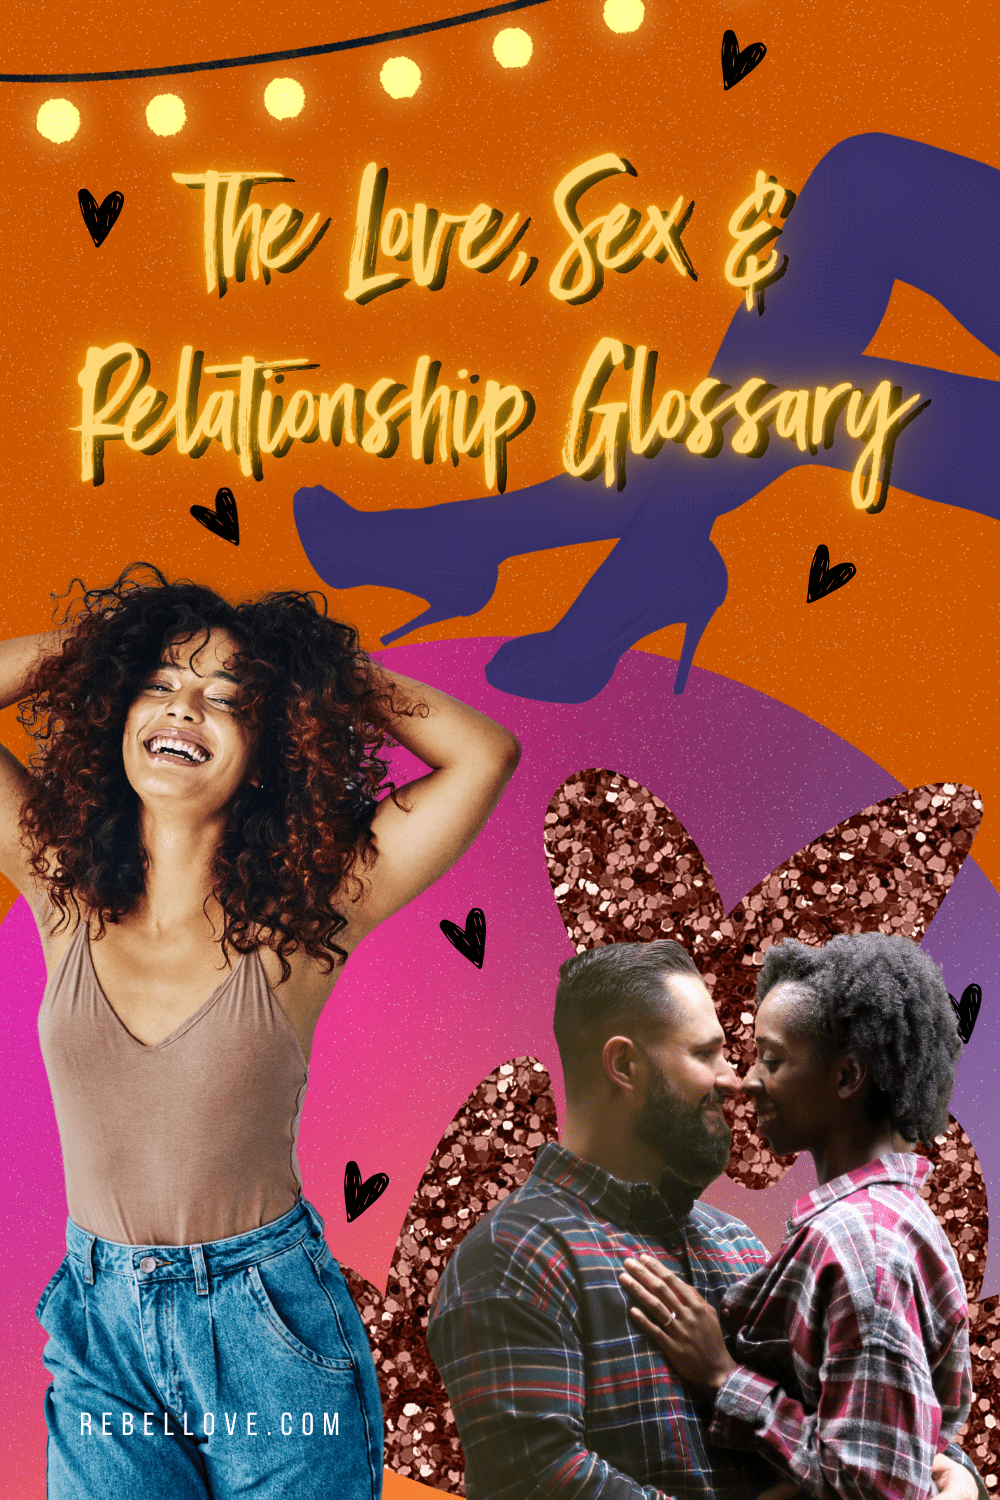 The Love, Sex, and Relationship Glossary picture